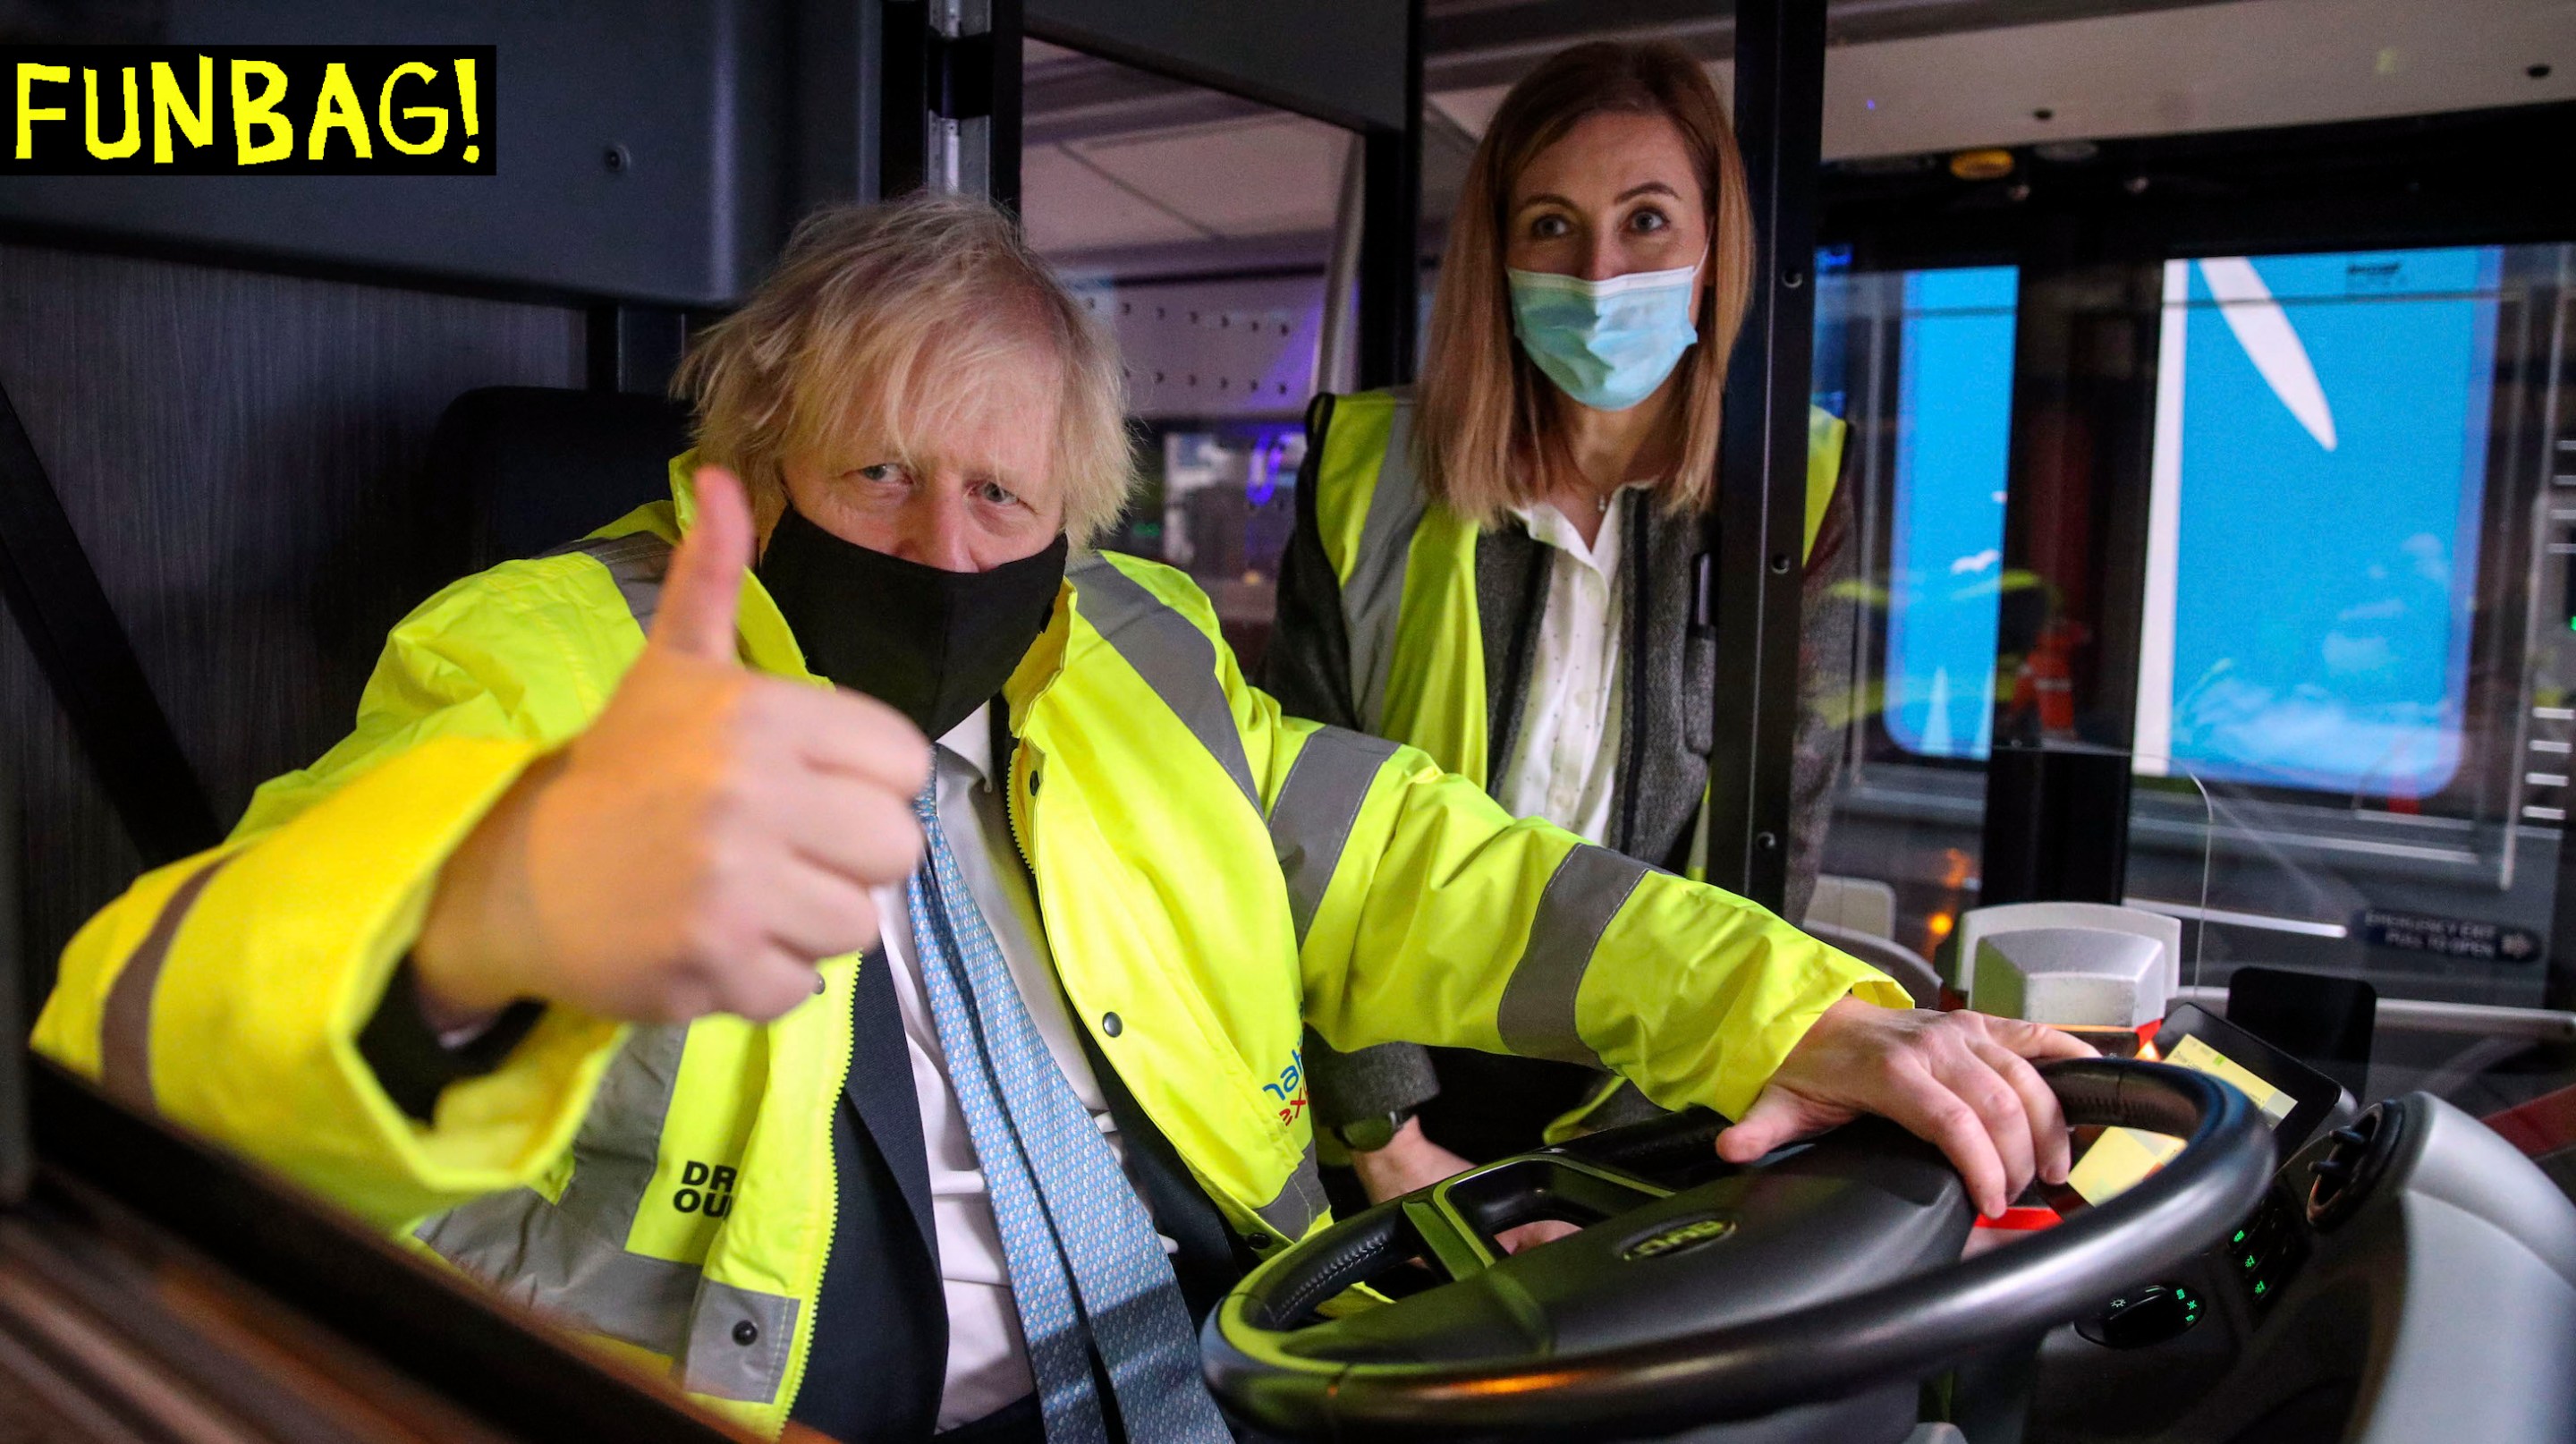 Prime Minister Boris Johnson alongside electric vehicles operations manager Agata Litwinowicz-Soltysiak during a visit to the National Express depot in Coventry. The Prime Minister is unveiling a shake-up of the bus sector which aims to see lower, simpler flat fares in towns and cities, turn-up-and-go services on main routes, and new flexible services to reconnect communities. Picture date: Monday March 15, 2021. PA Photo. See PA story POLITICS Bus. Photo credit should read: Steve Parsons/PA Wire